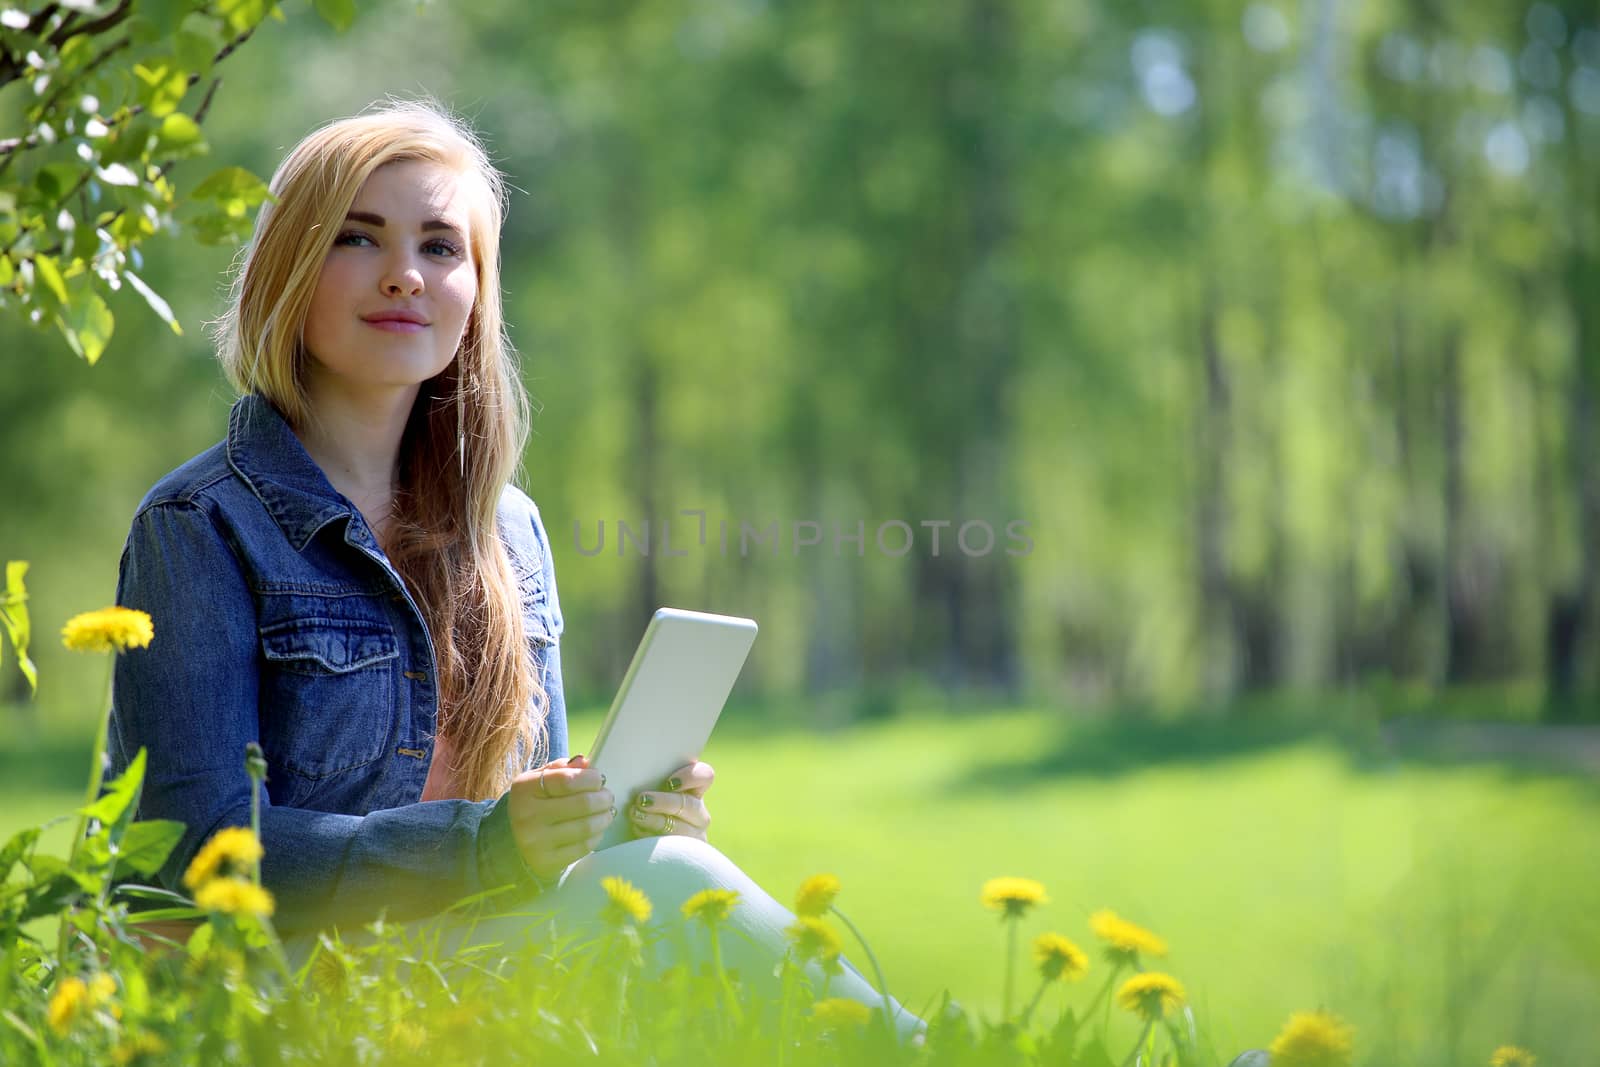 Young woman using tablet in spring park with flowers